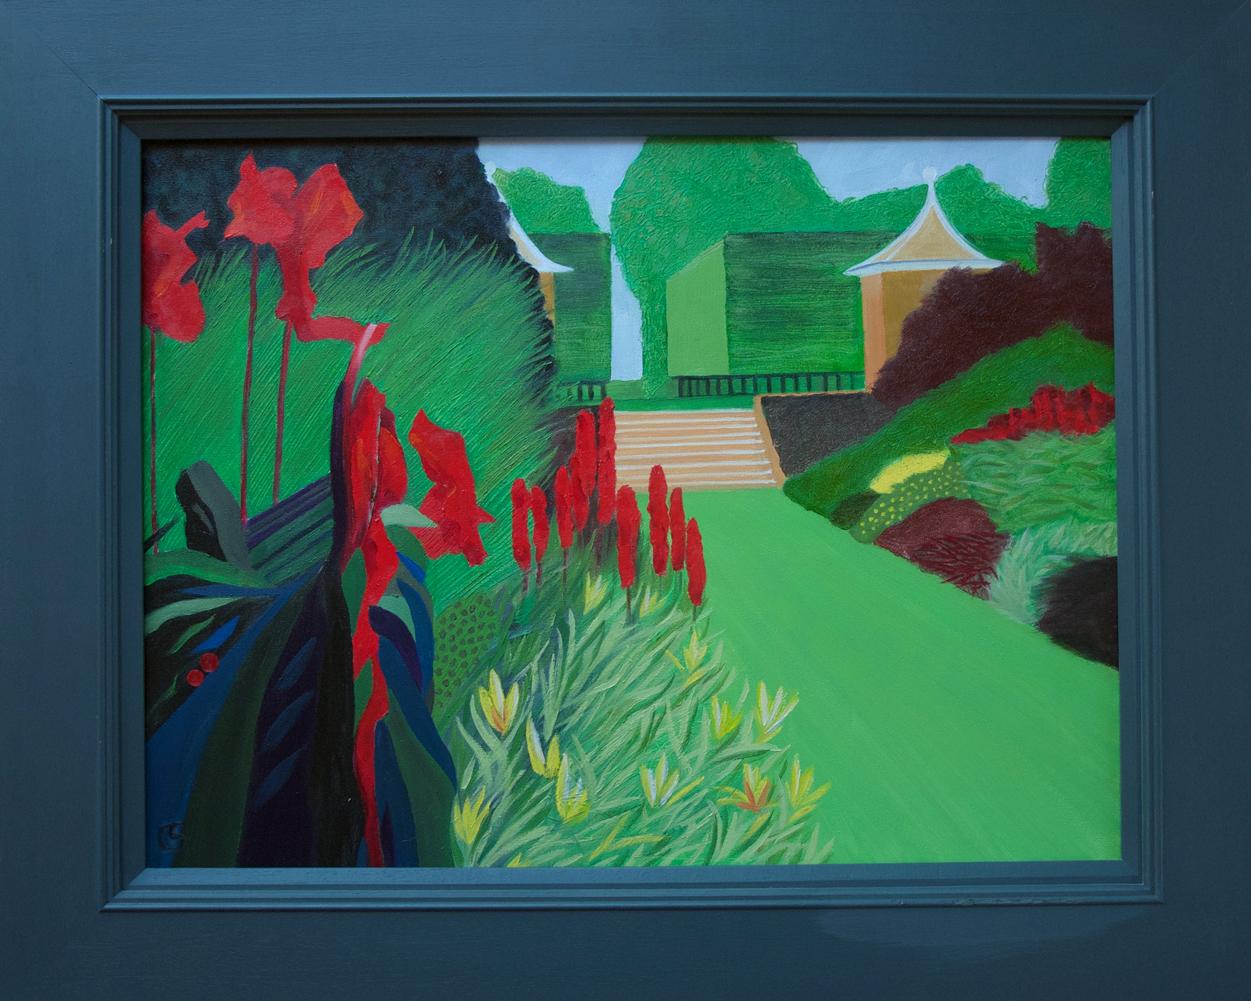 My name is Christo Sharpe. ‘Red borders’ is the latest in a series of garden paintings. I have undertaken many commissions based on gardens and I find the subject endlessly fascinating. In this painting I have been able to fully explore my love of